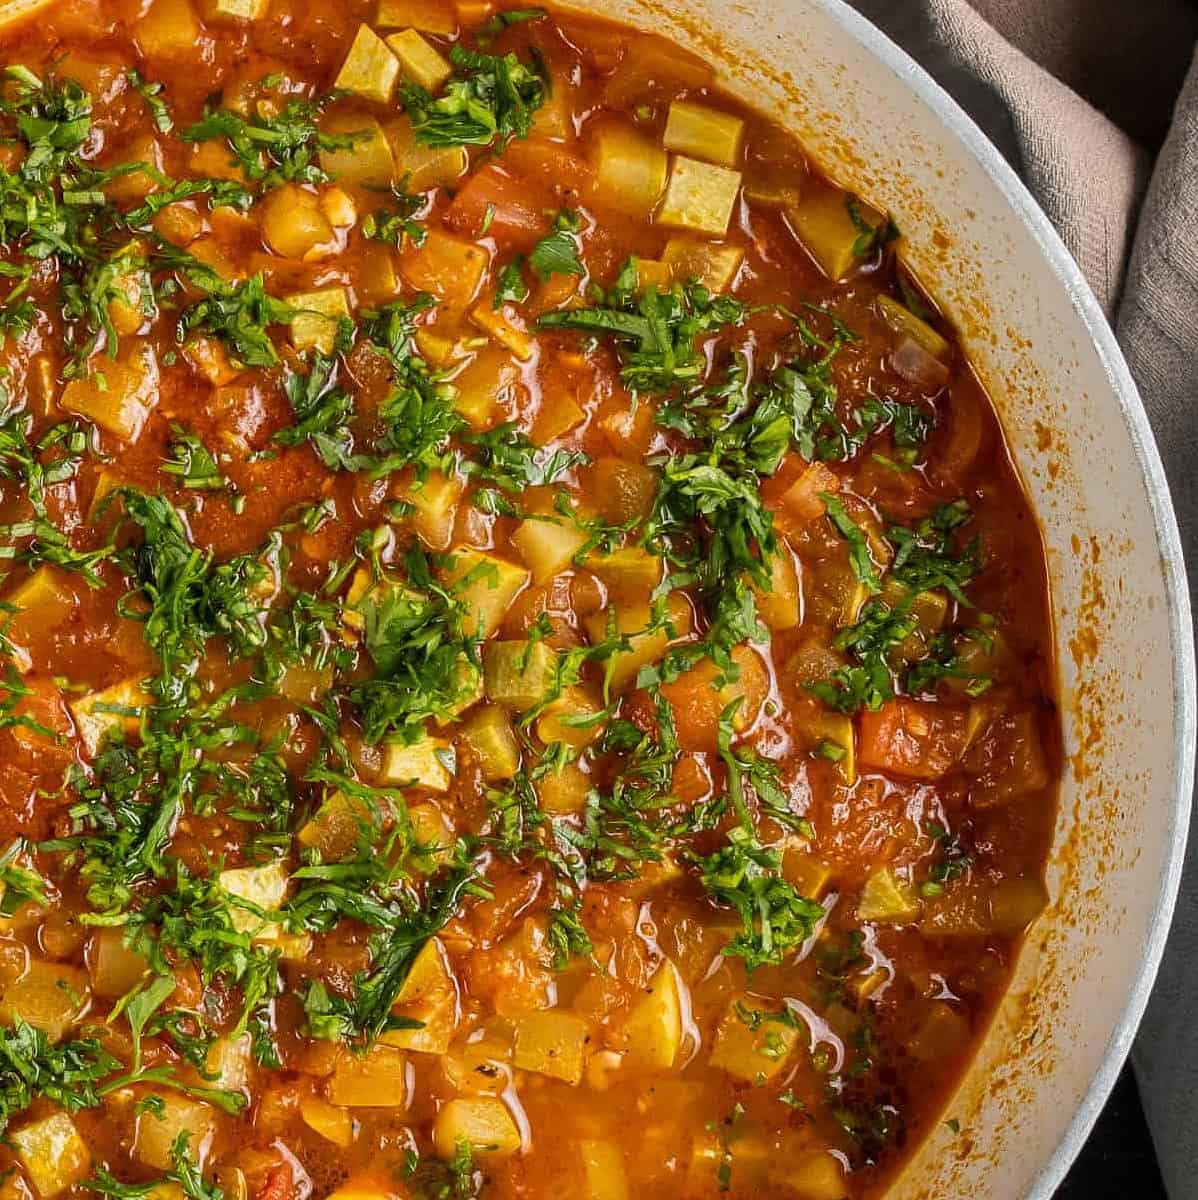  Warm up from the inside-out with a big bowl of zucchini stew on a chilly day.